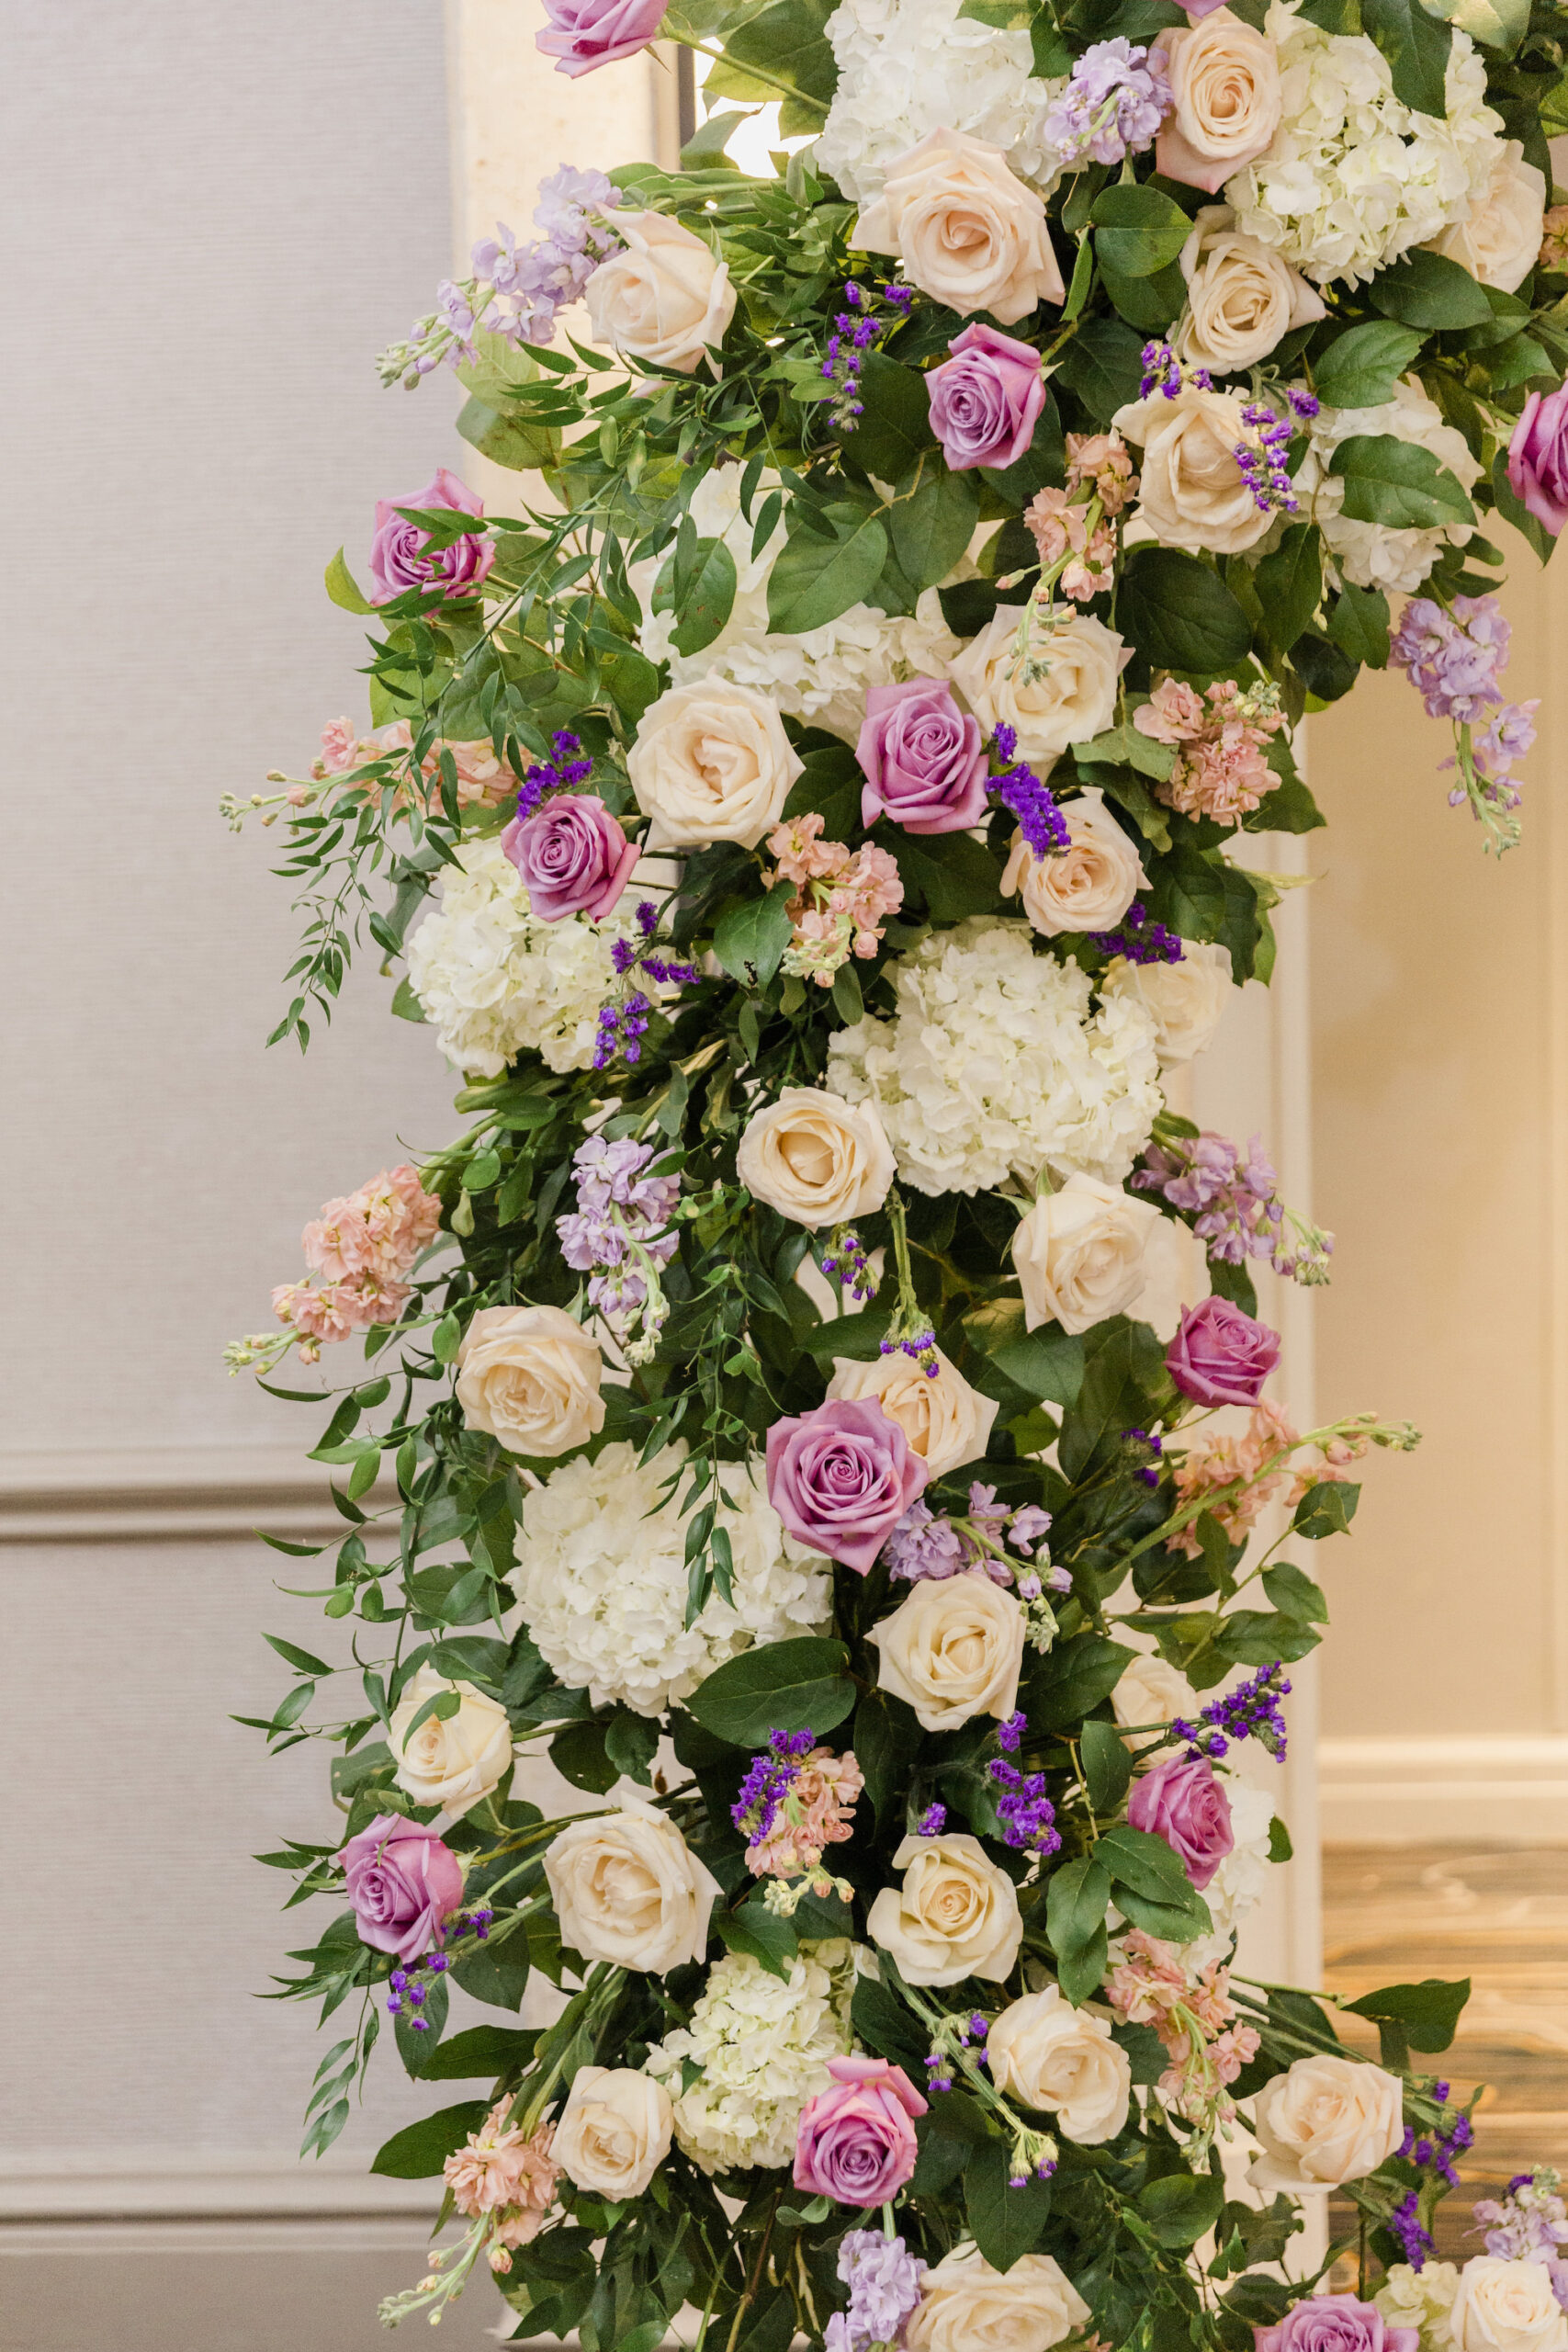 White Hydrangeas, Stock Flowers, Purple, and Blush Pink Roses for Wedding Ceremony Arch Backdrop Inspiration